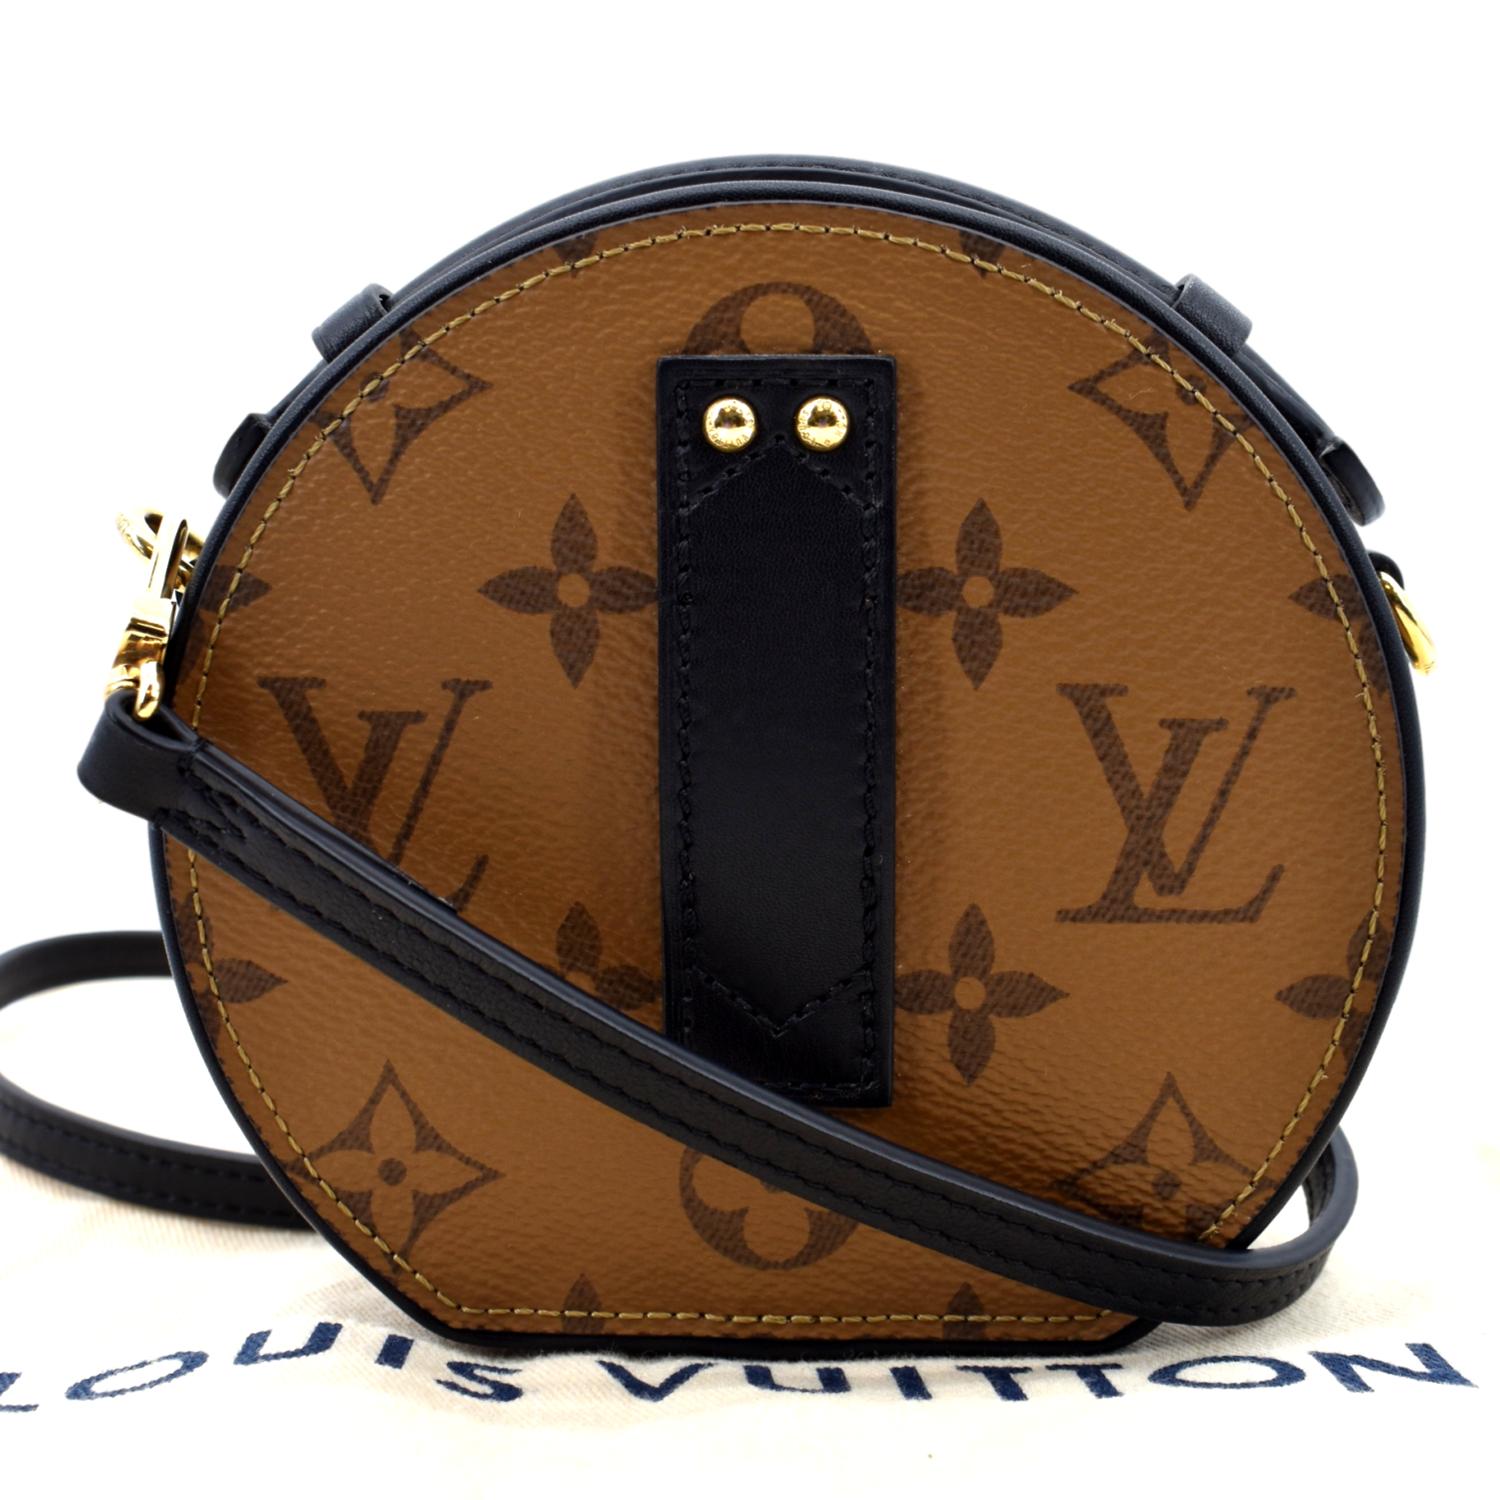 Bandoulière Bag Strap Monogram Canvas - Wallets and Small Leather